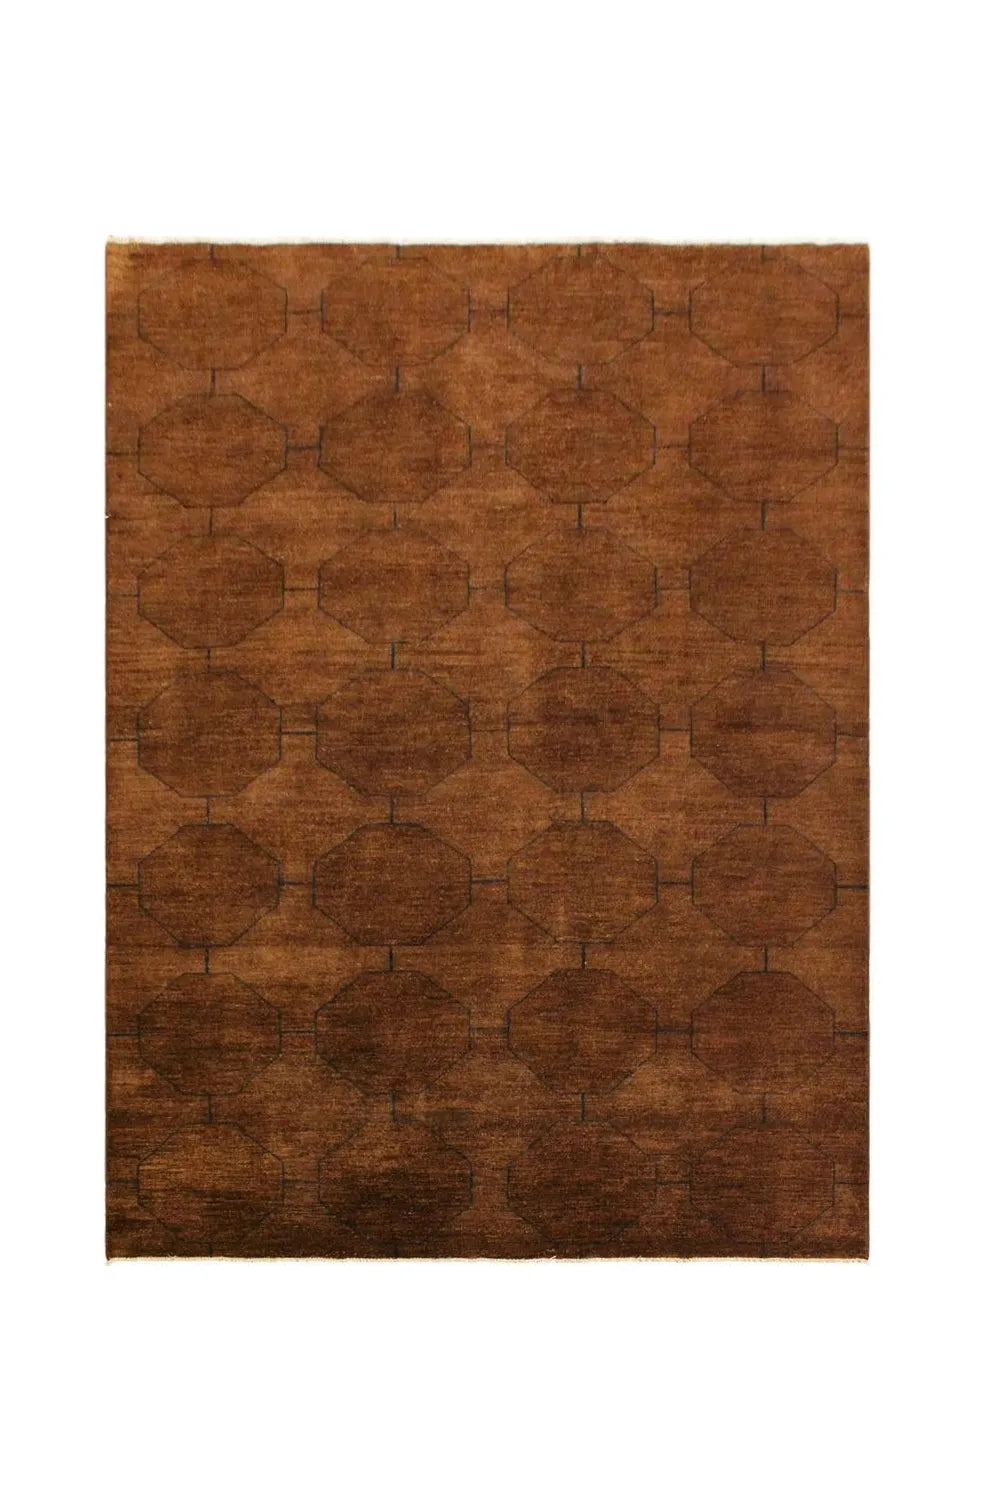 Modern Overdyed Brown Geometric Wool Rug in a Cozy 6x8 Size